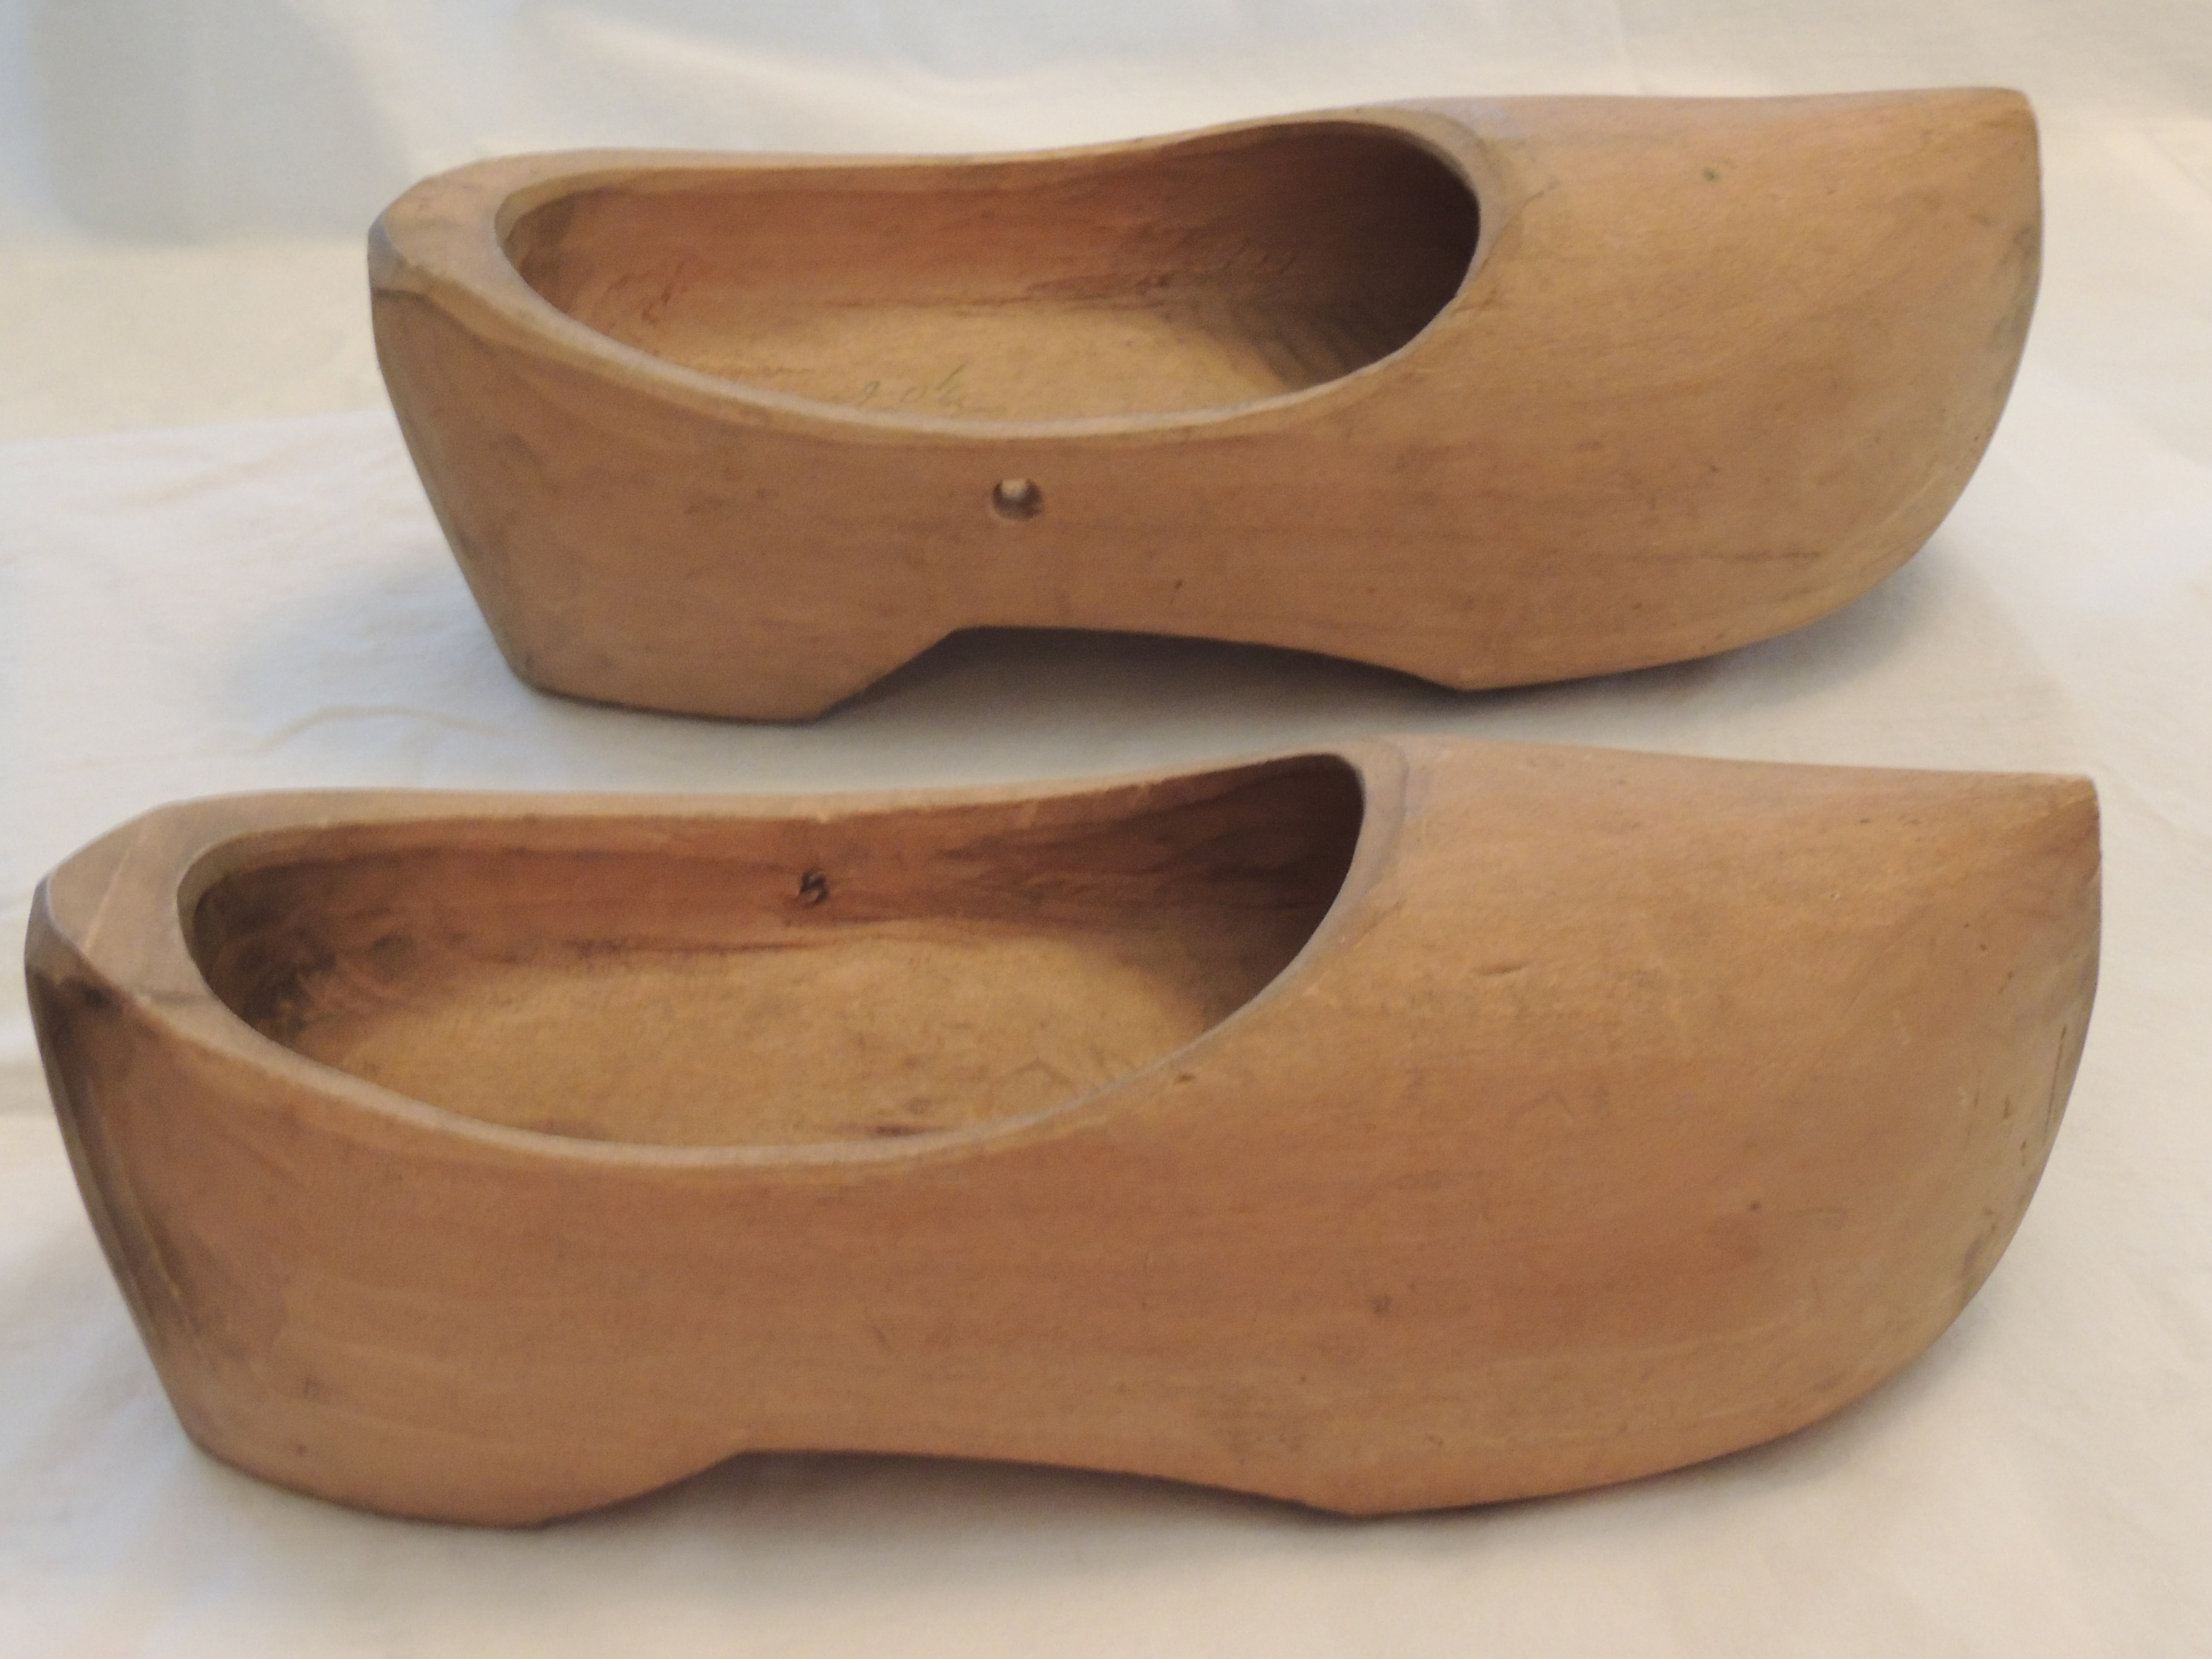 Wooden Shoes Souvenir Paint Present, Pictures Of Wooden Shoes From Holland And Barrett